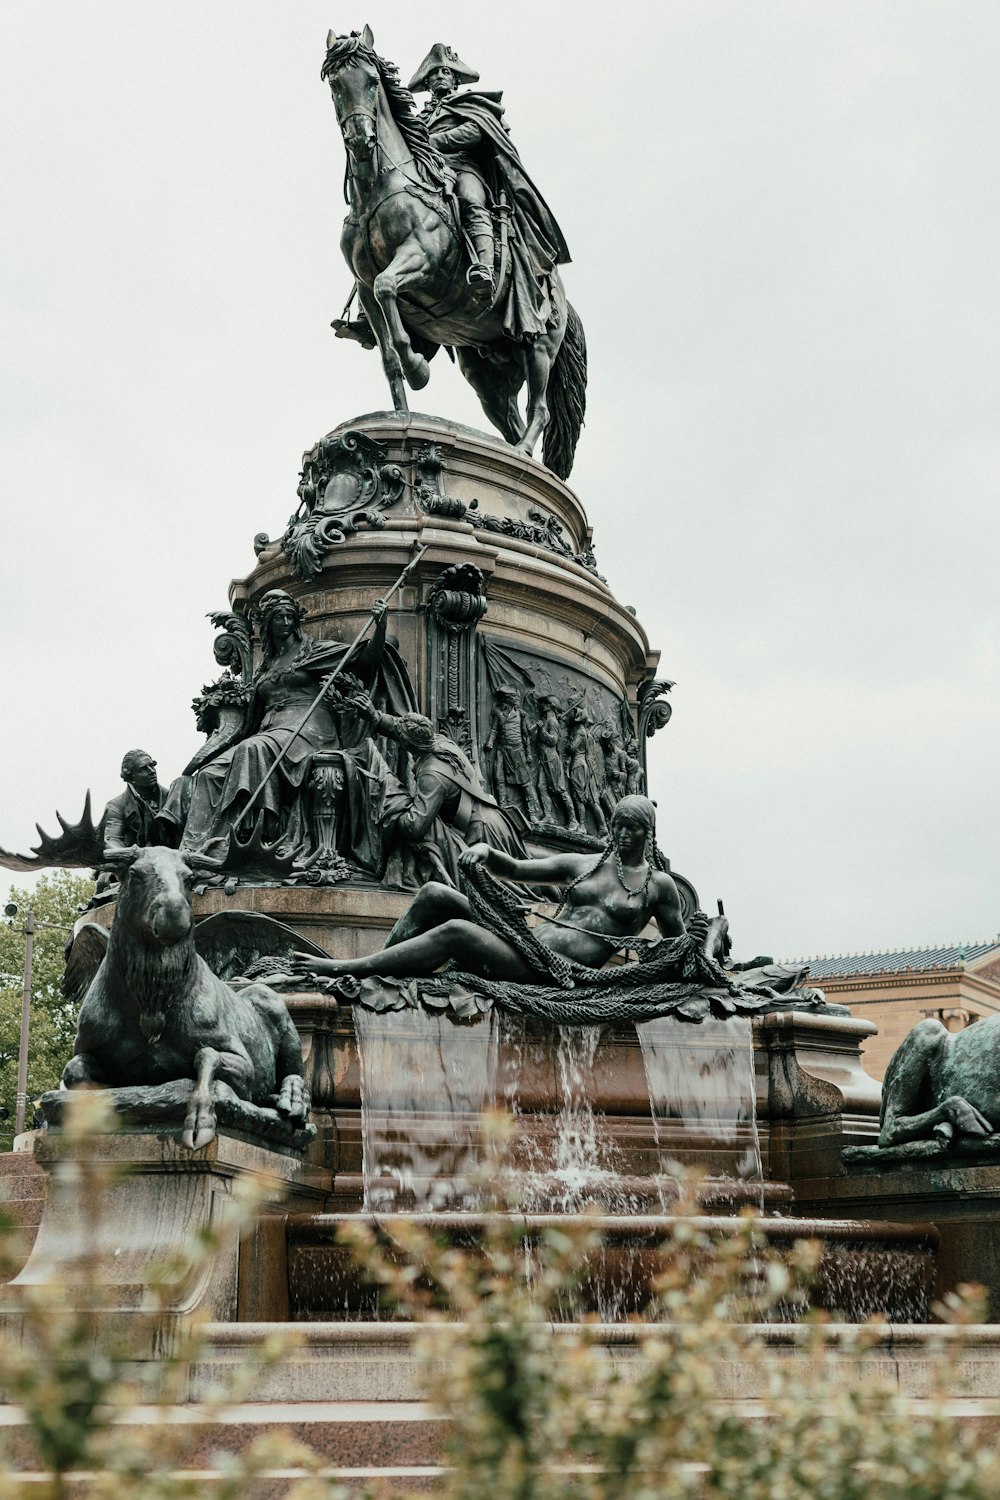 a statue of a man riding a horse on top of a fountain